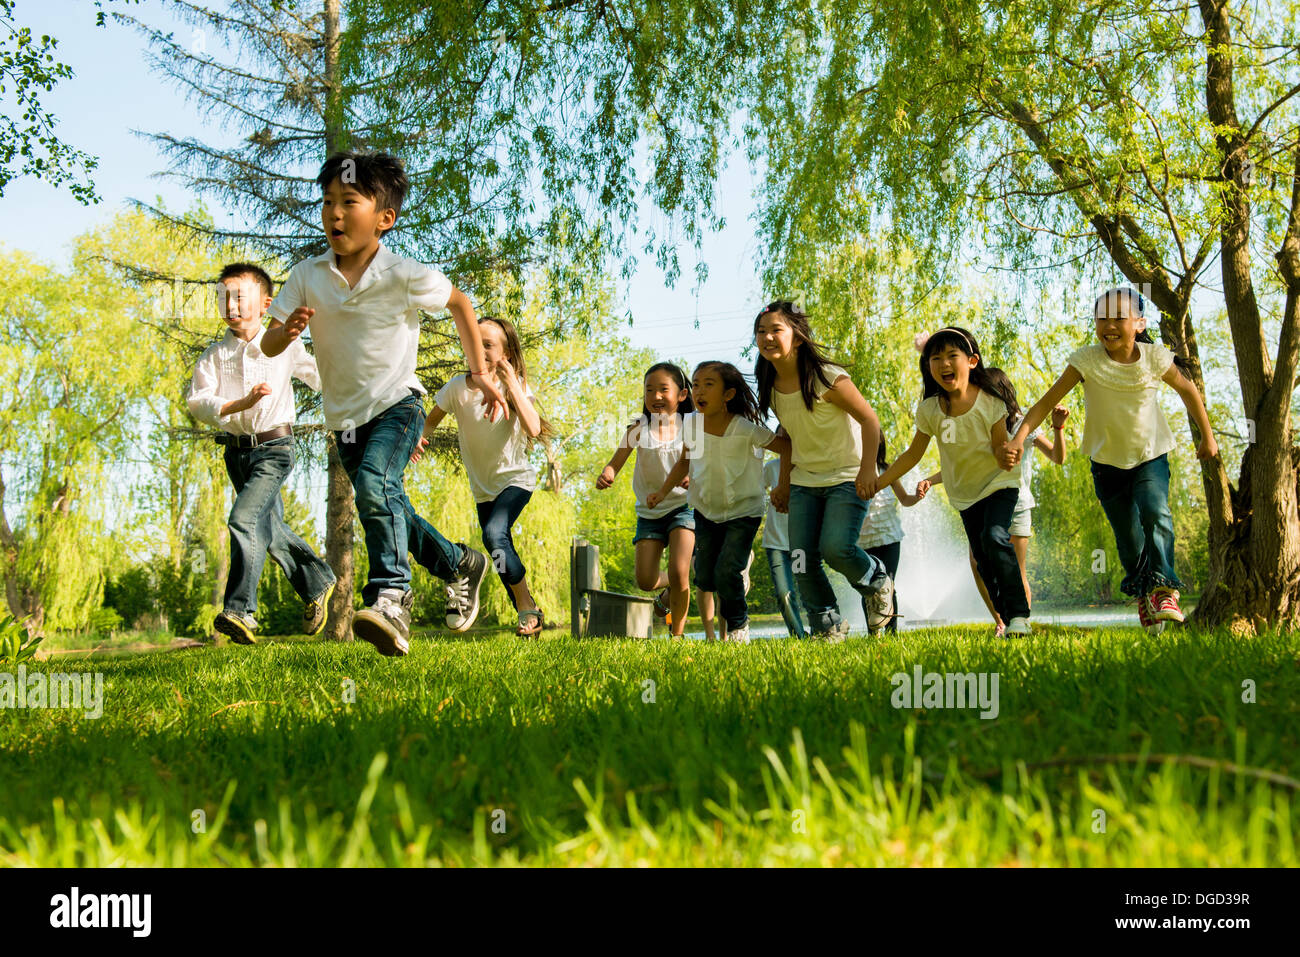 Boys and girls running in park Stock Photo